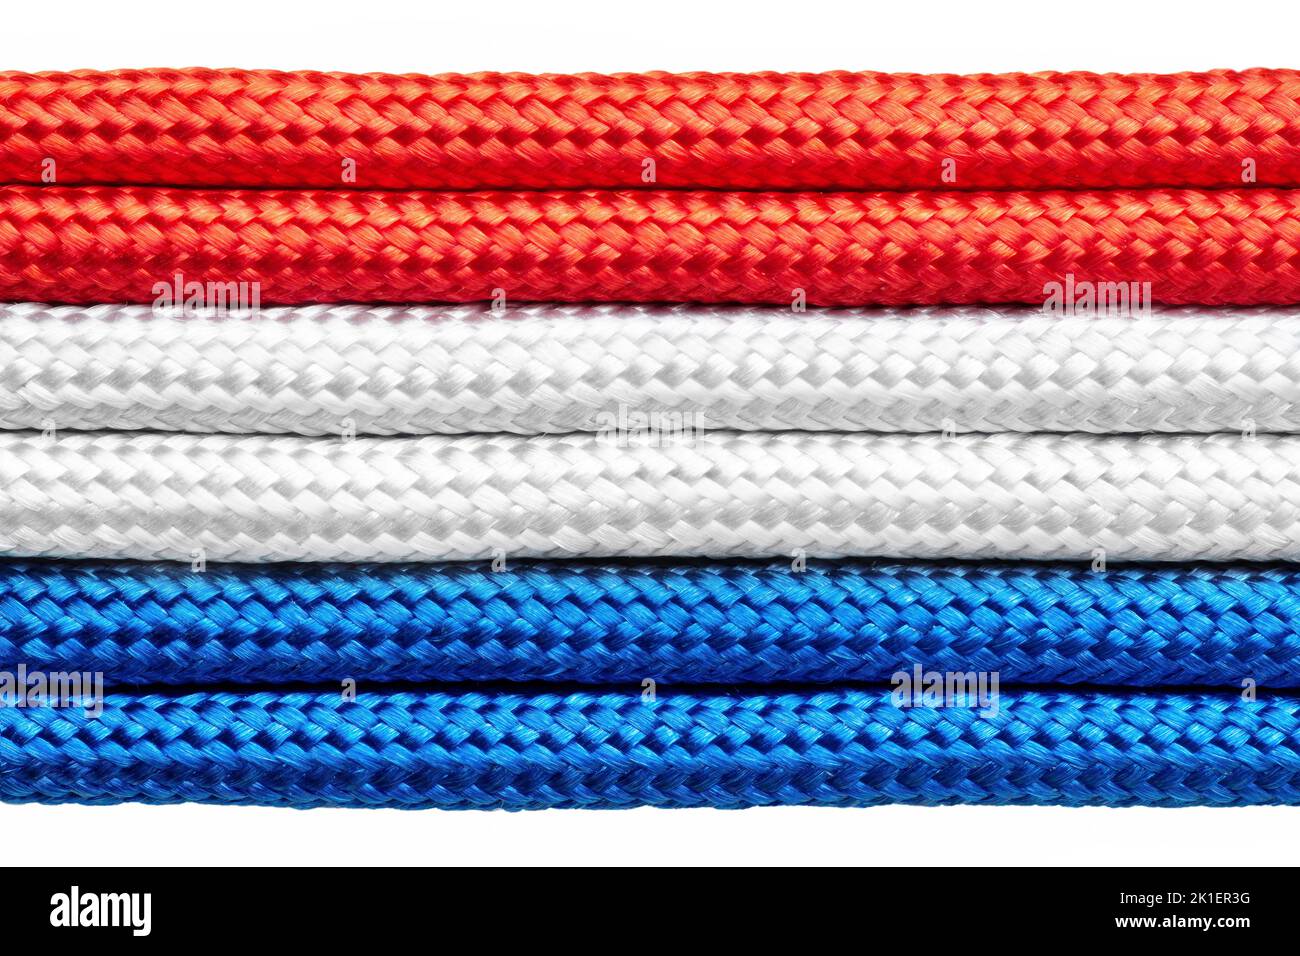 National flag of the Netherlands made from dyed braided cords isolated on white. Stock Photo